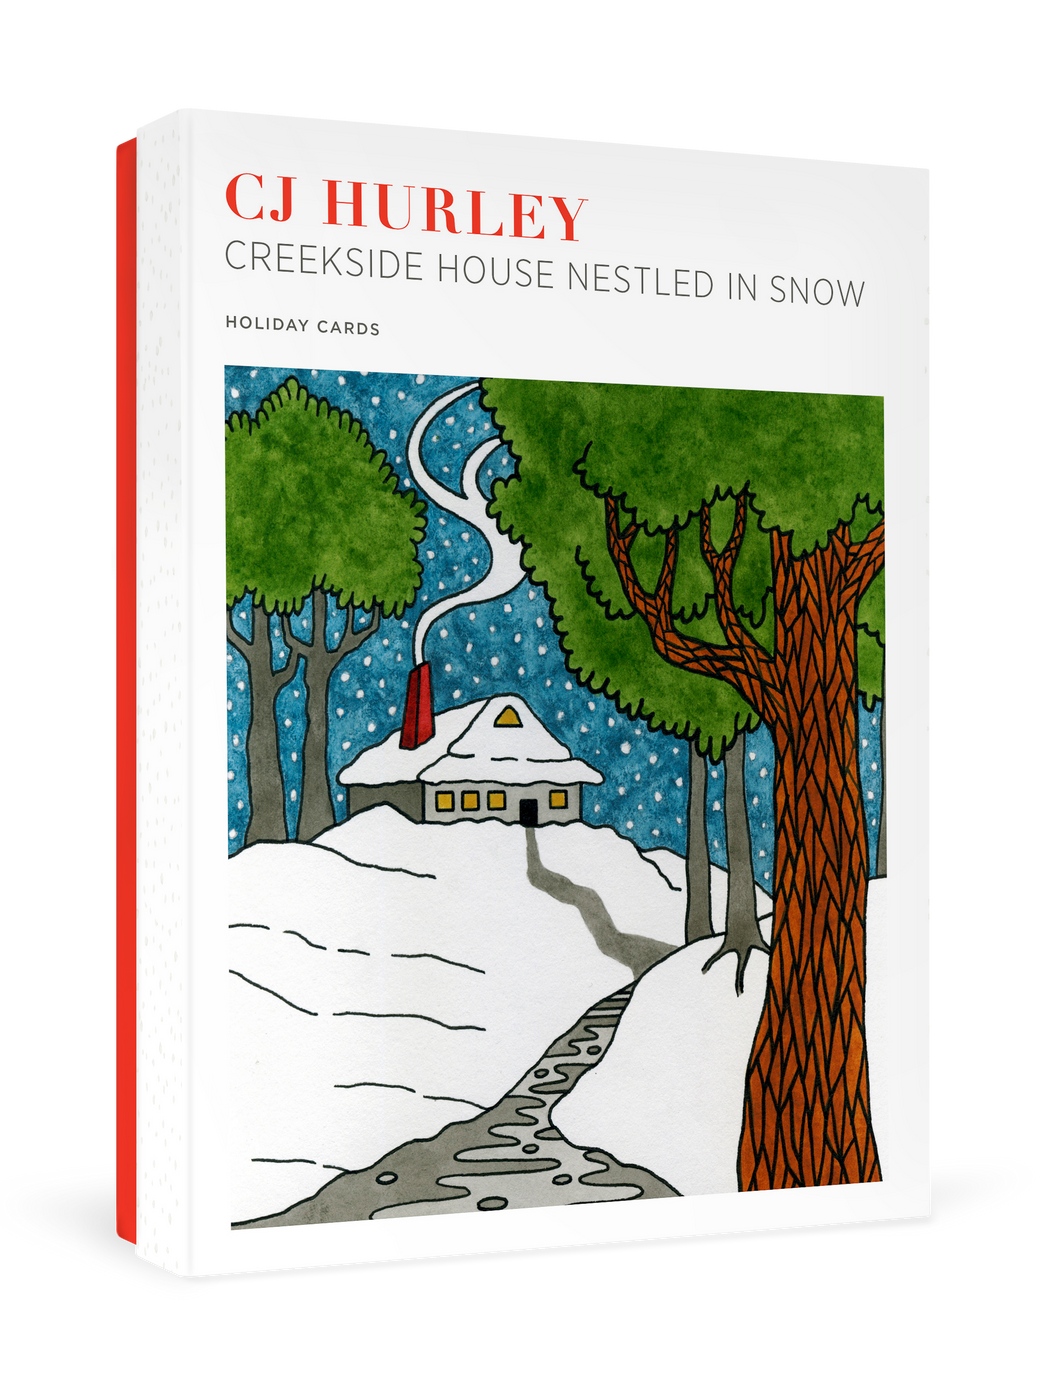 CJ Hurley: Creekside House Nestled in Snow Holiday Cards_Primary